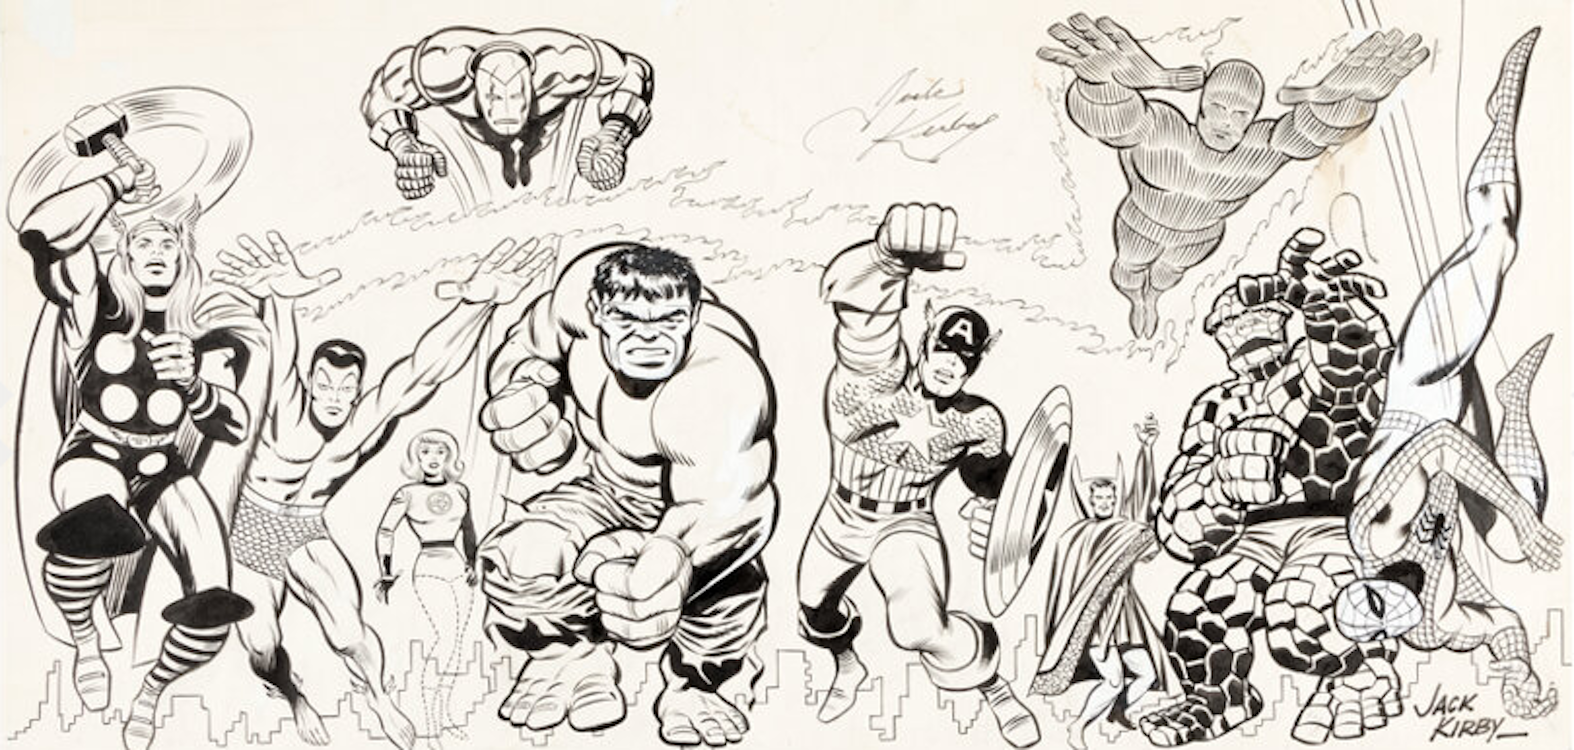 Esquire September 1966 Illustration by Jack Kirby sold for $168,000. Click here to get your original art appraised.